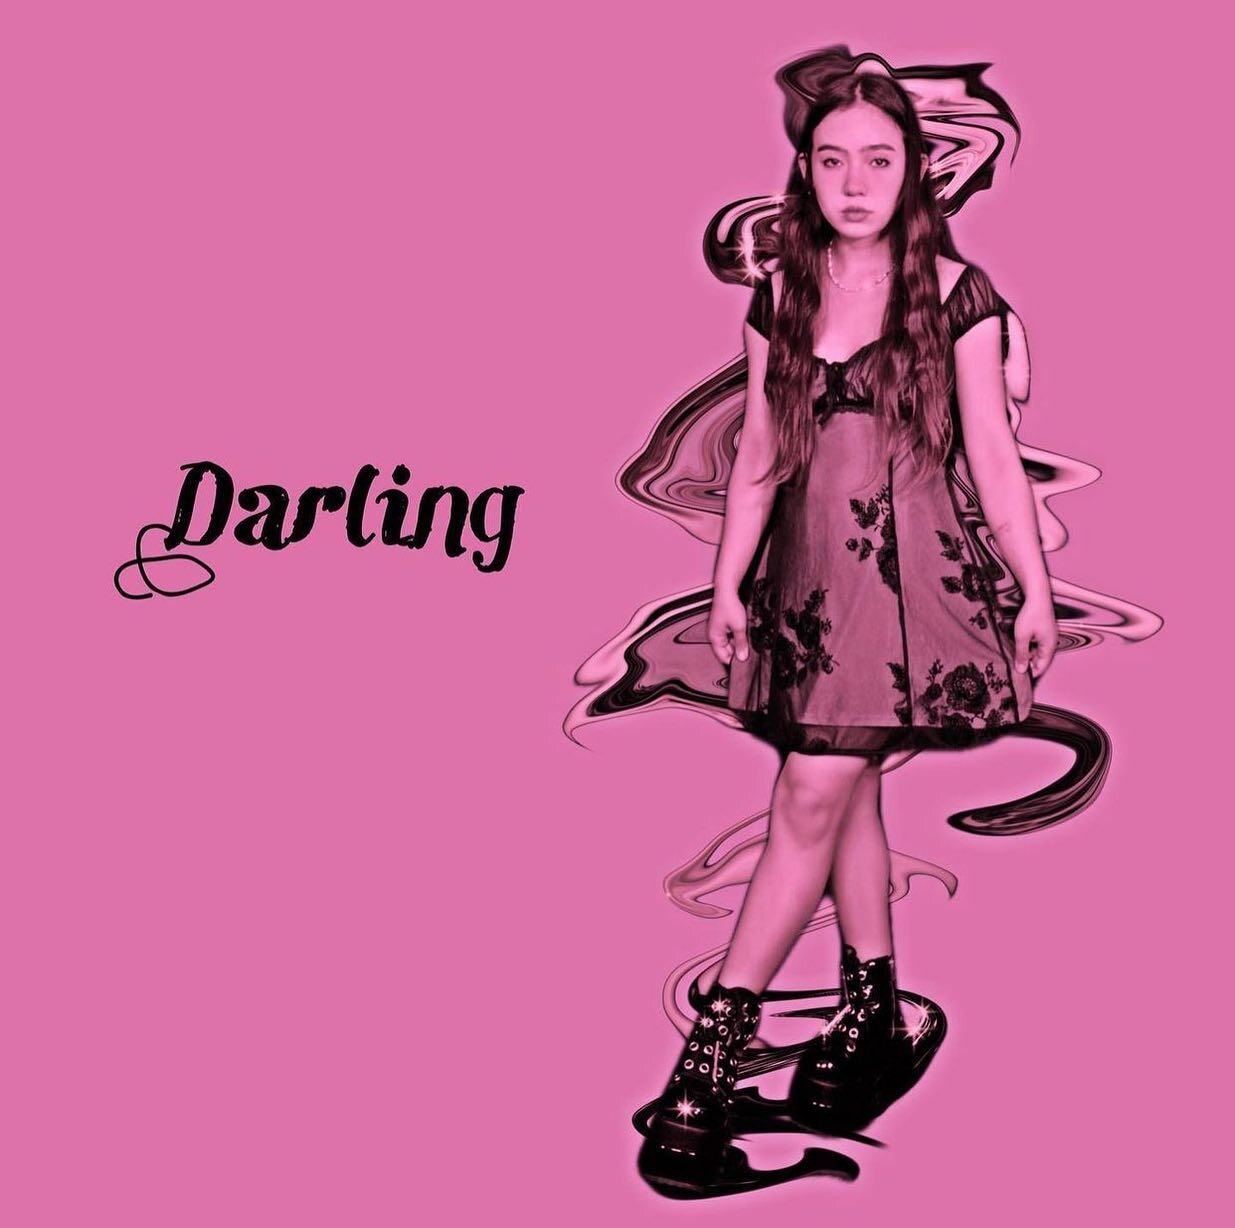 Not everyday day do I get to make something which such talented people where the process is so incredibly effortless! These people are badass &ldquo;Darling&rdquo; out now